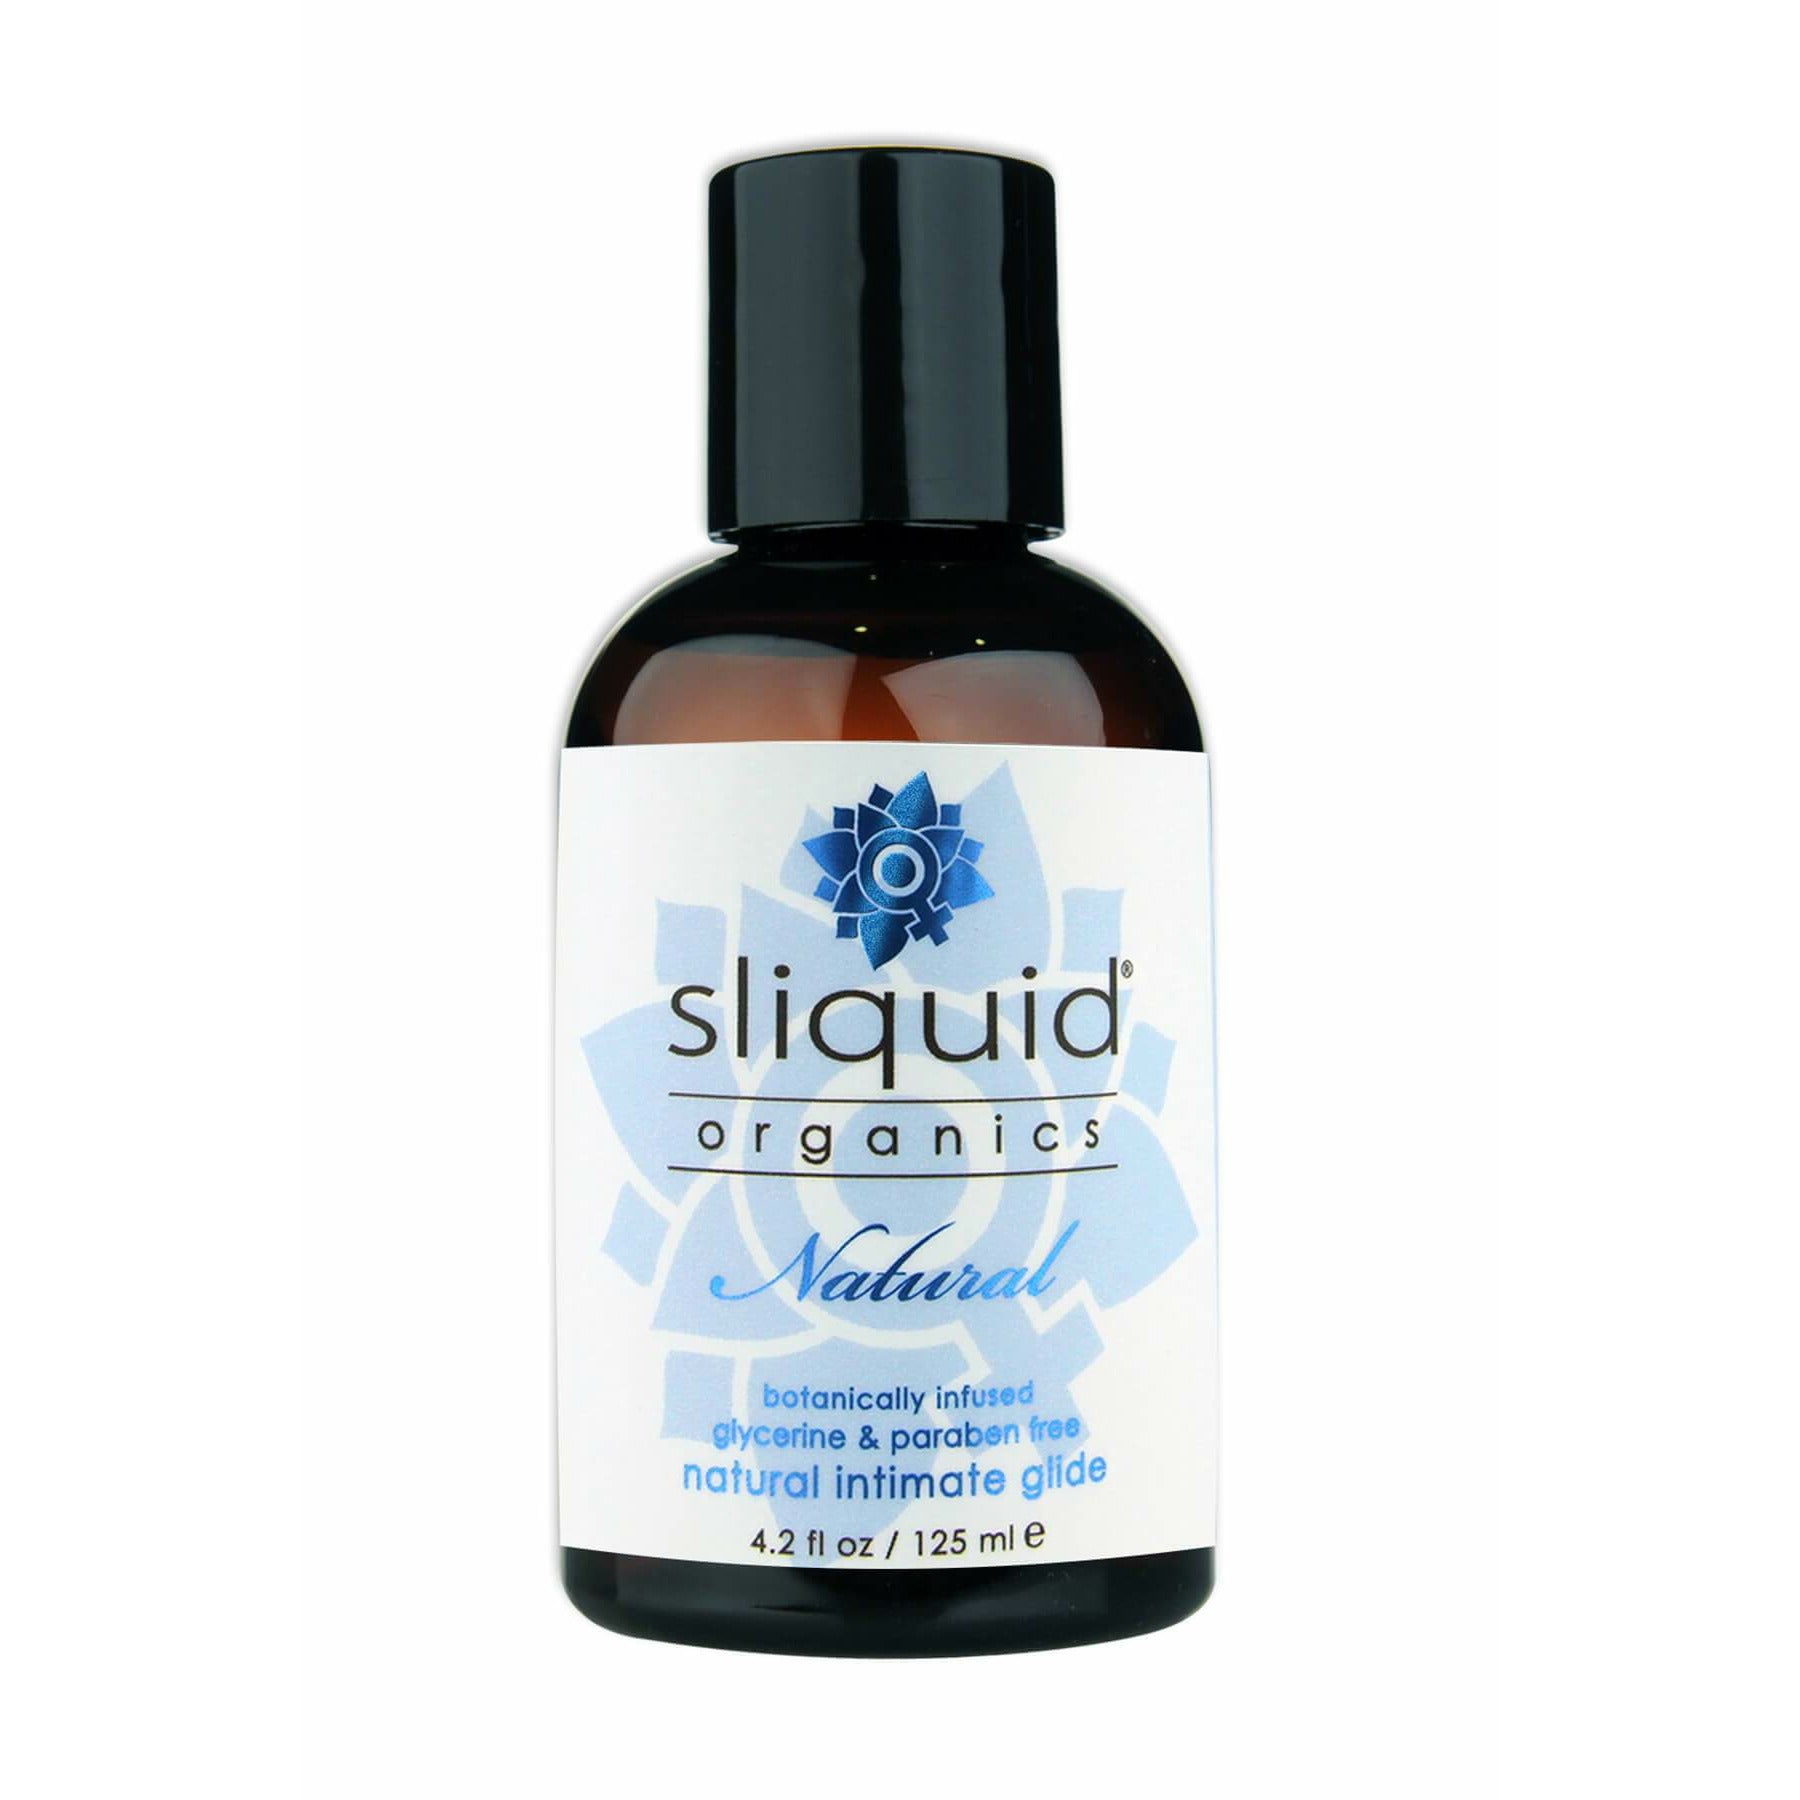 Sliquid Organics Natural Lubricant - The Bigger O - an online sex toy shop. We ship to USA, Canada and now the UK